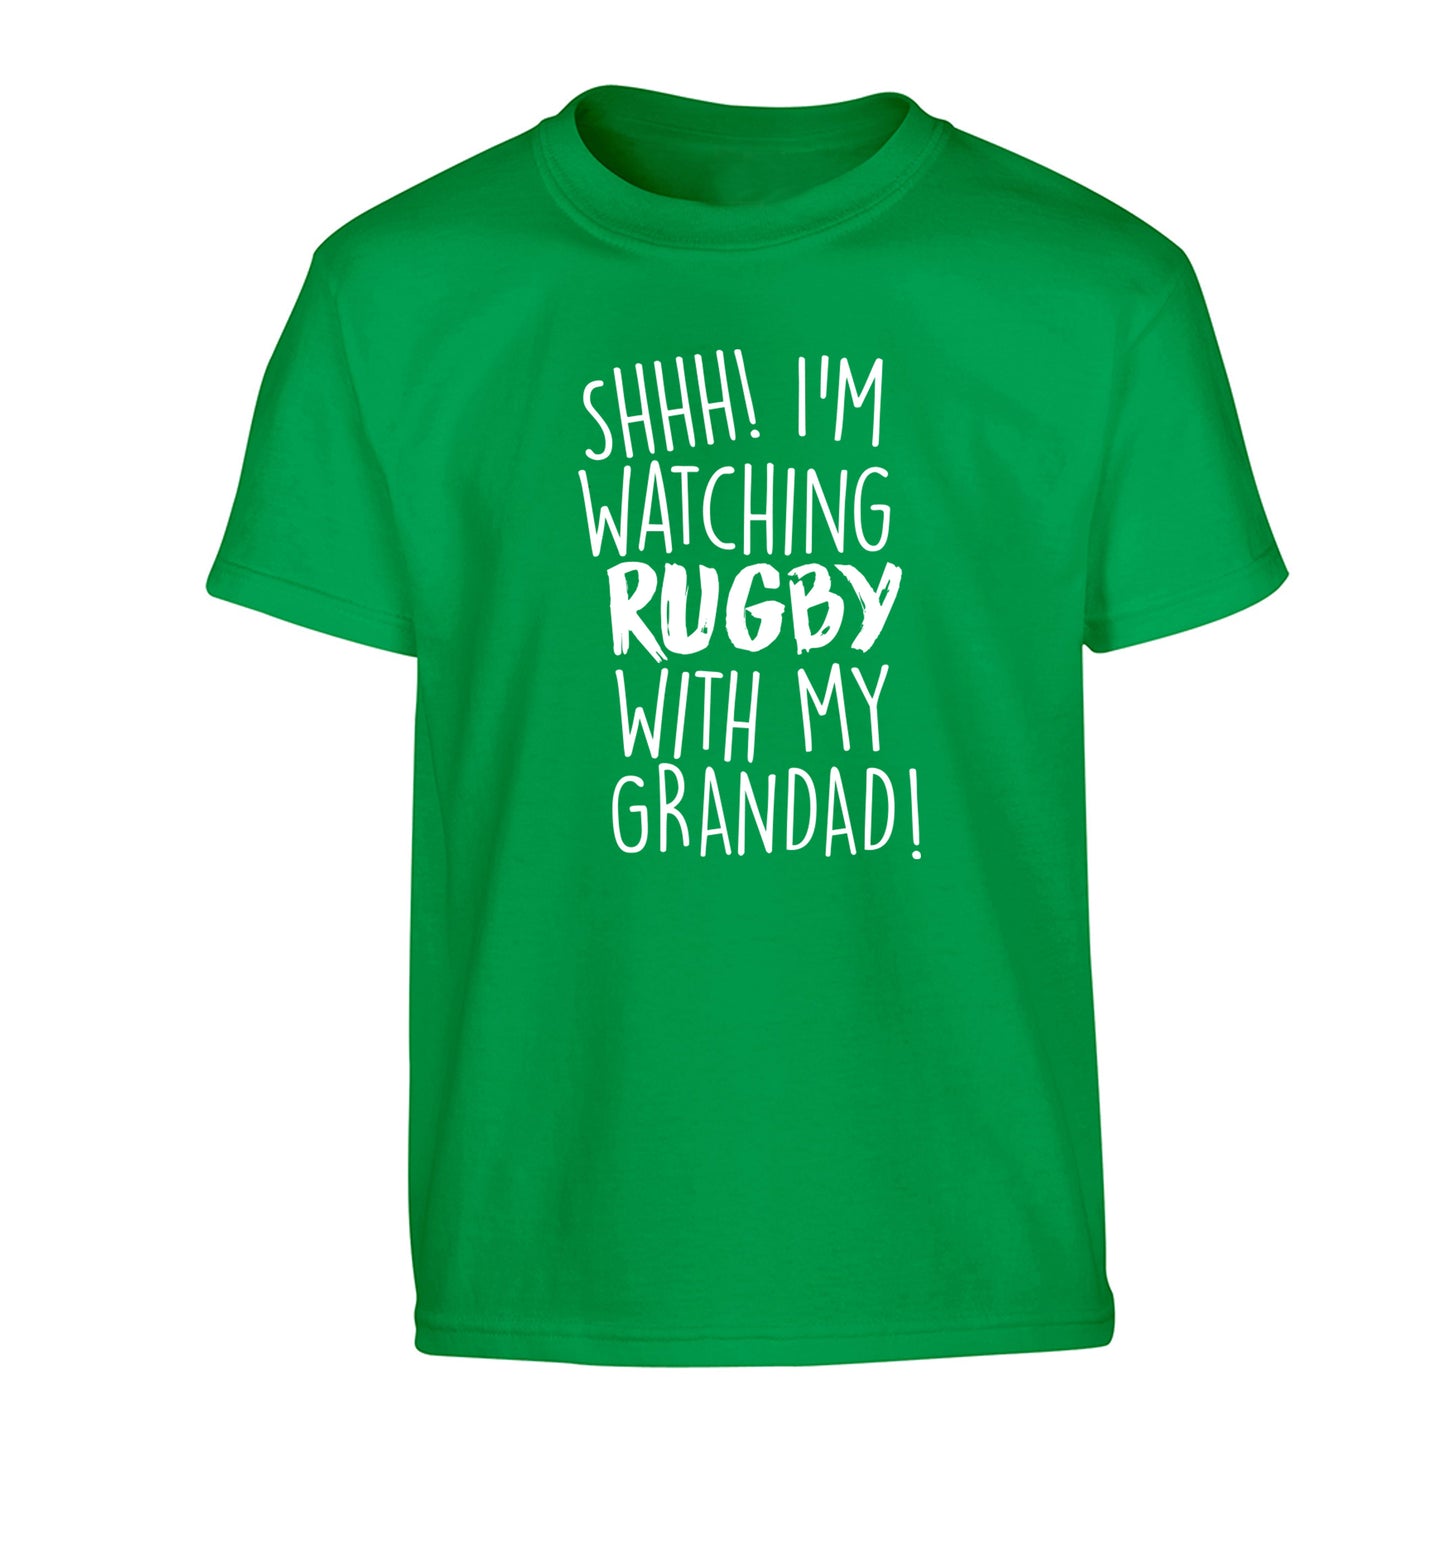 Shh I'm watching rugby with my grandad Children's green Tshirt 12-13 Years